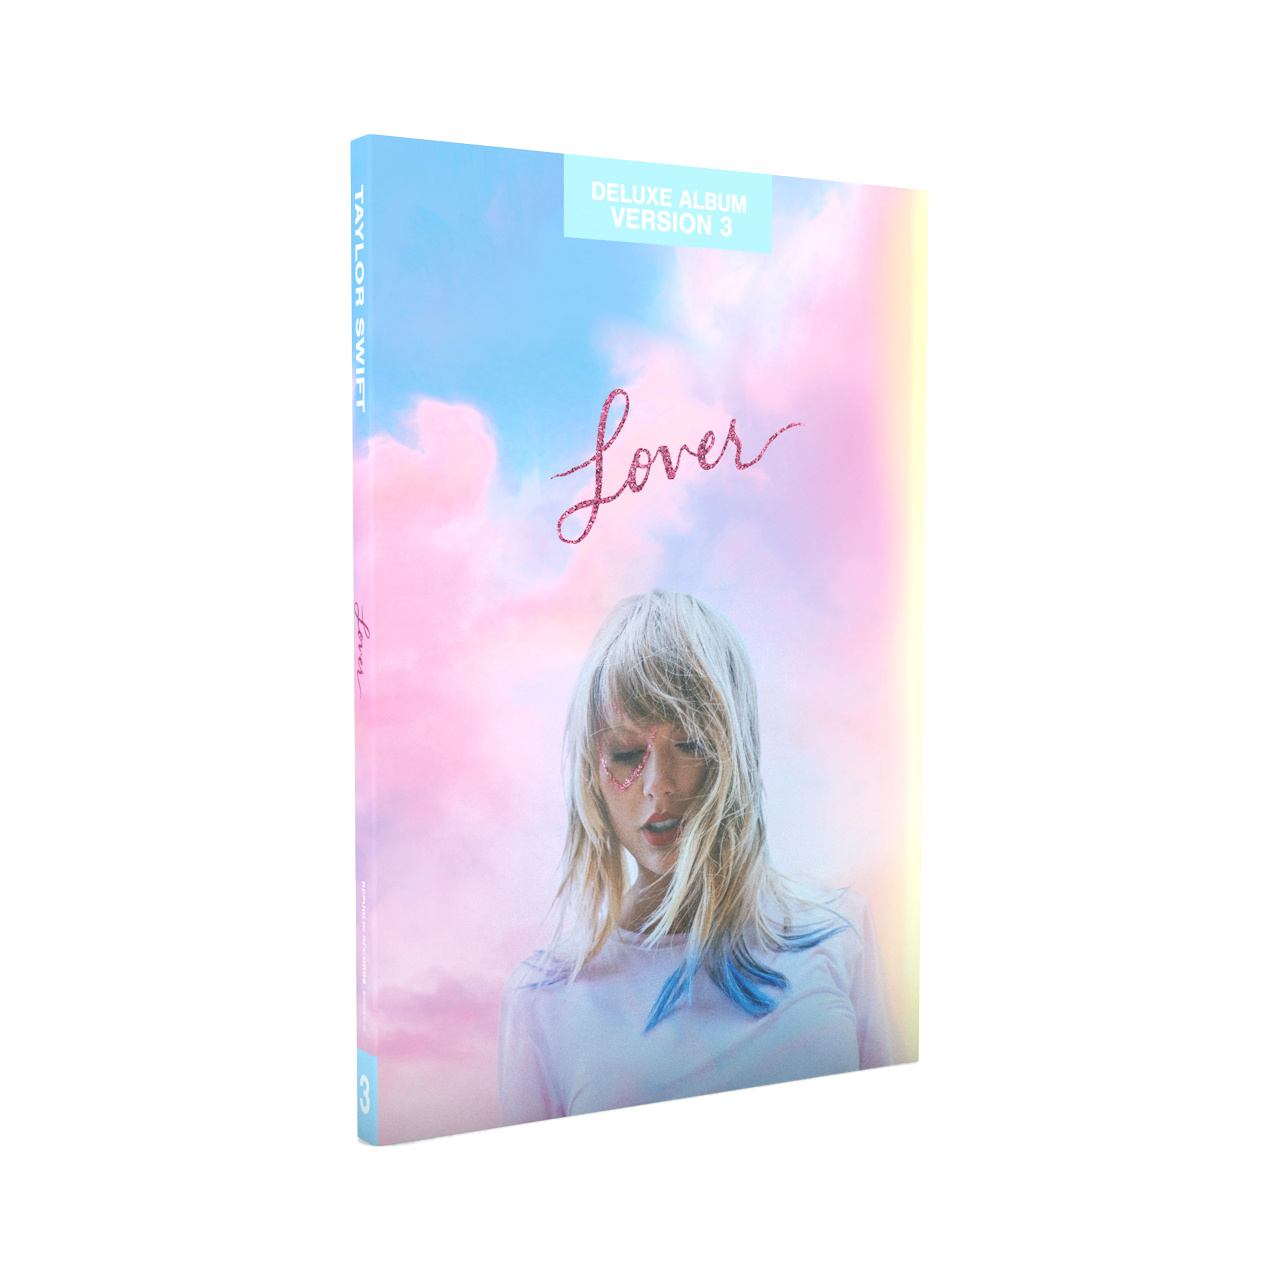 Taylor Swift - Lover CD Deluxe Version 3